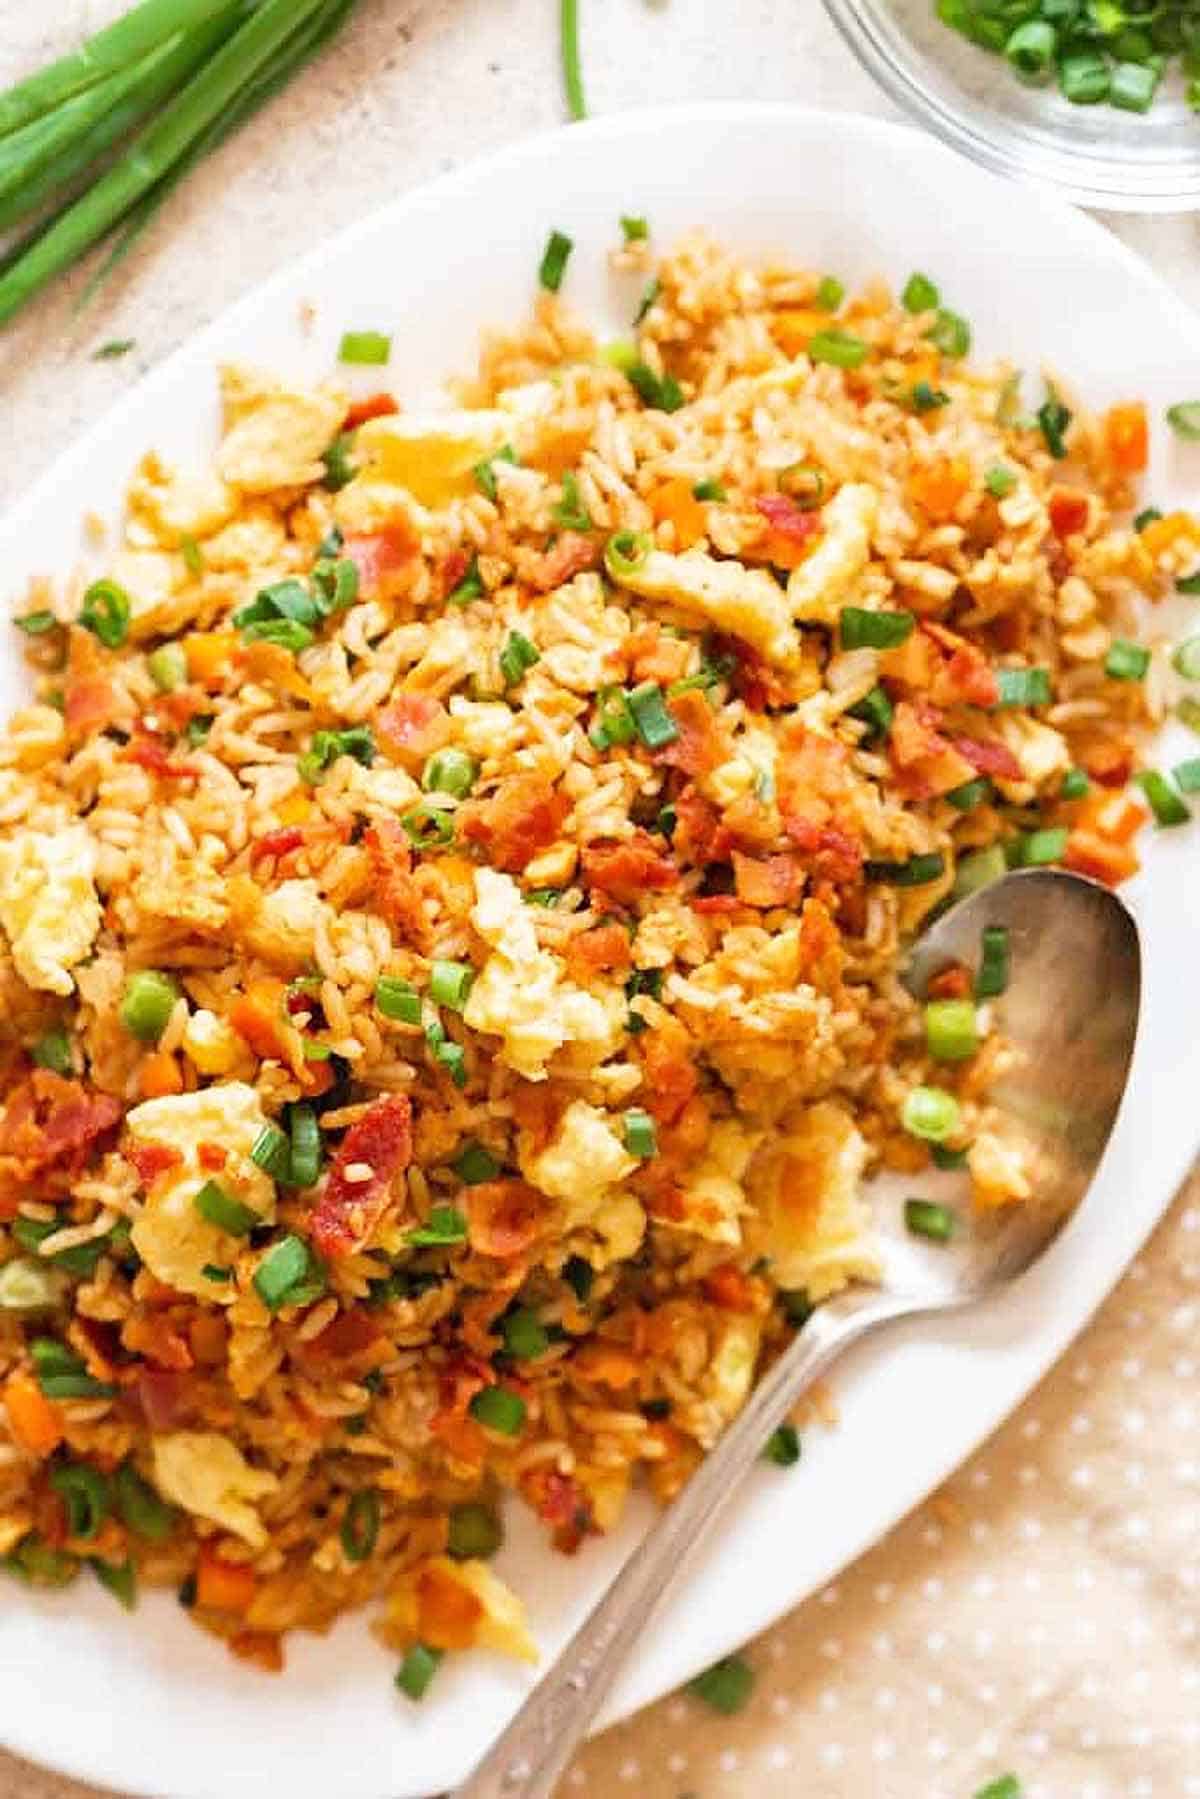 A platter of fried rice.